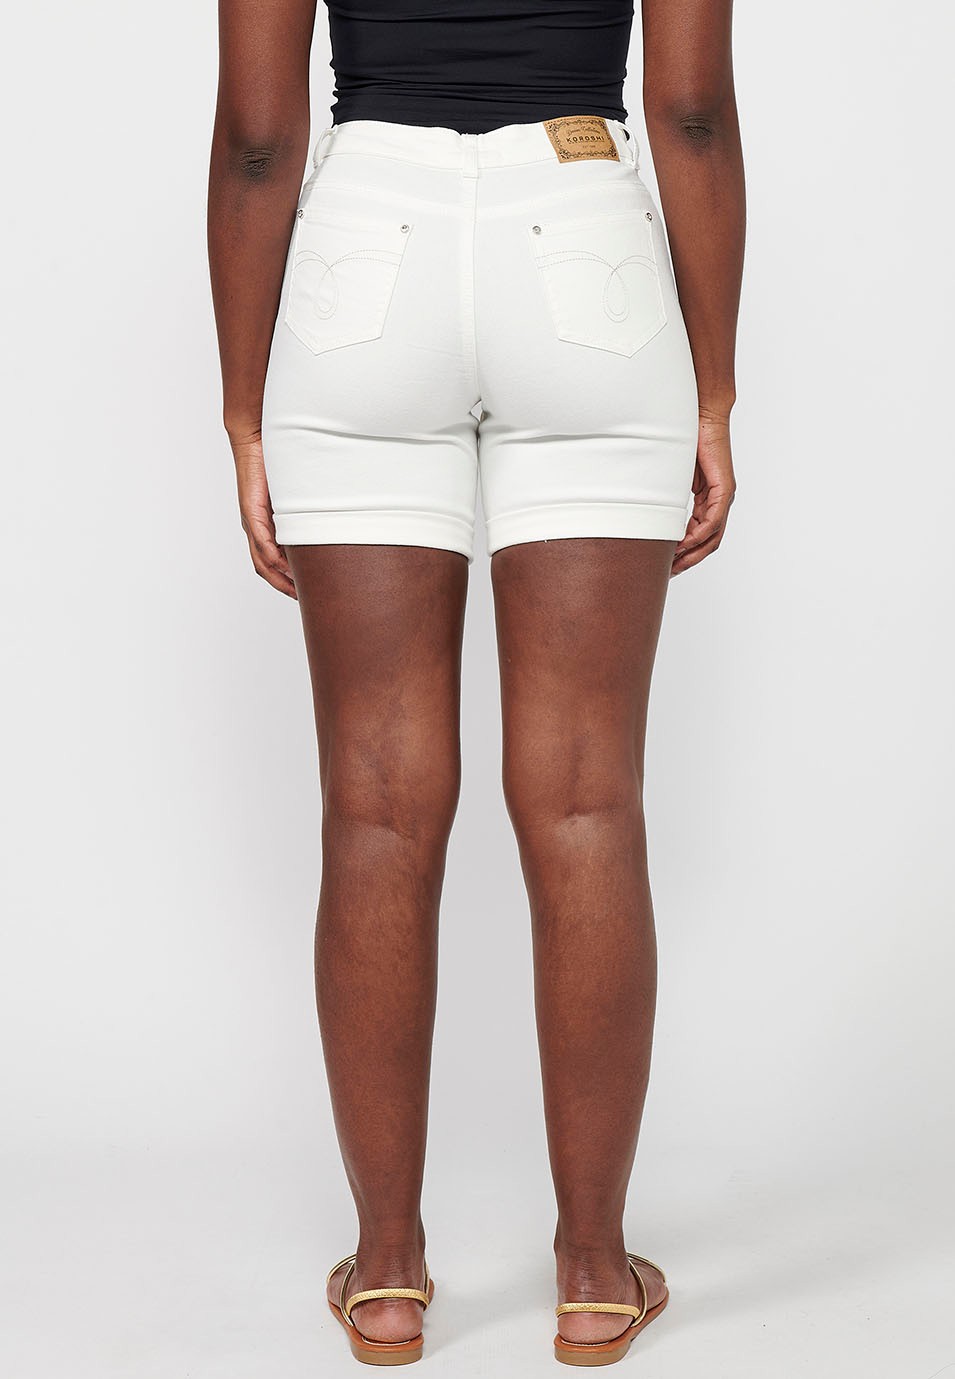 Shorts with cuffed finish with embroidery, white color for women